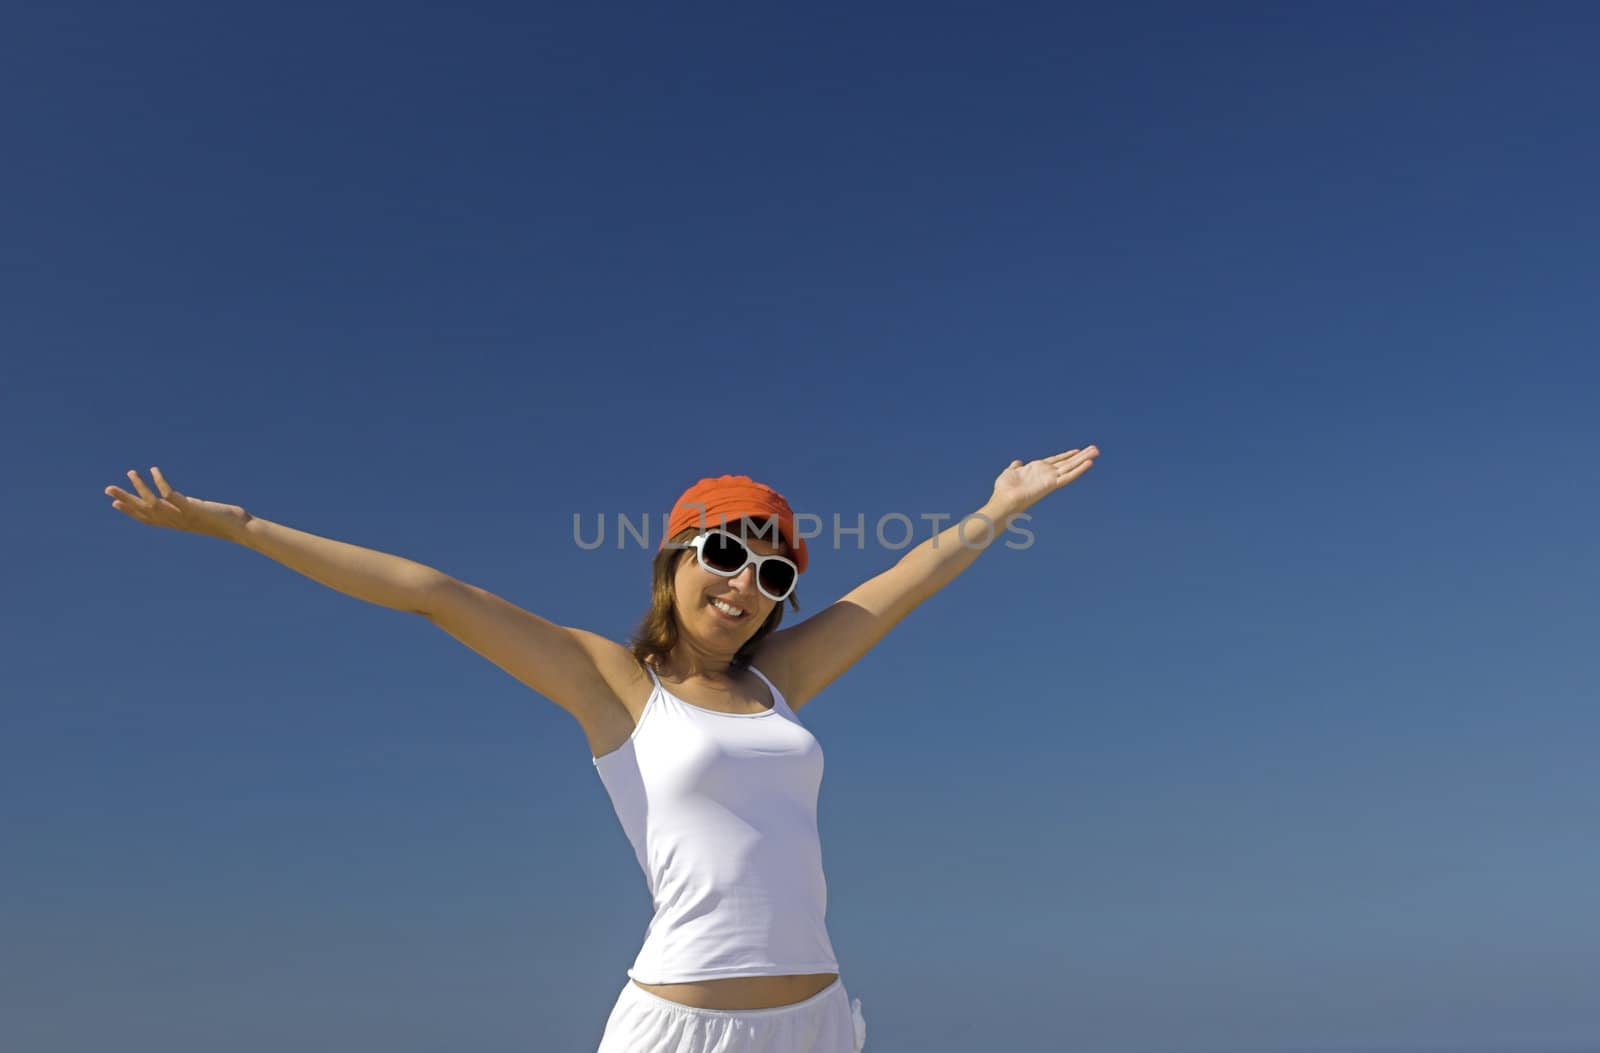 Happy woman with a orange hat and white glasses against a blue sky